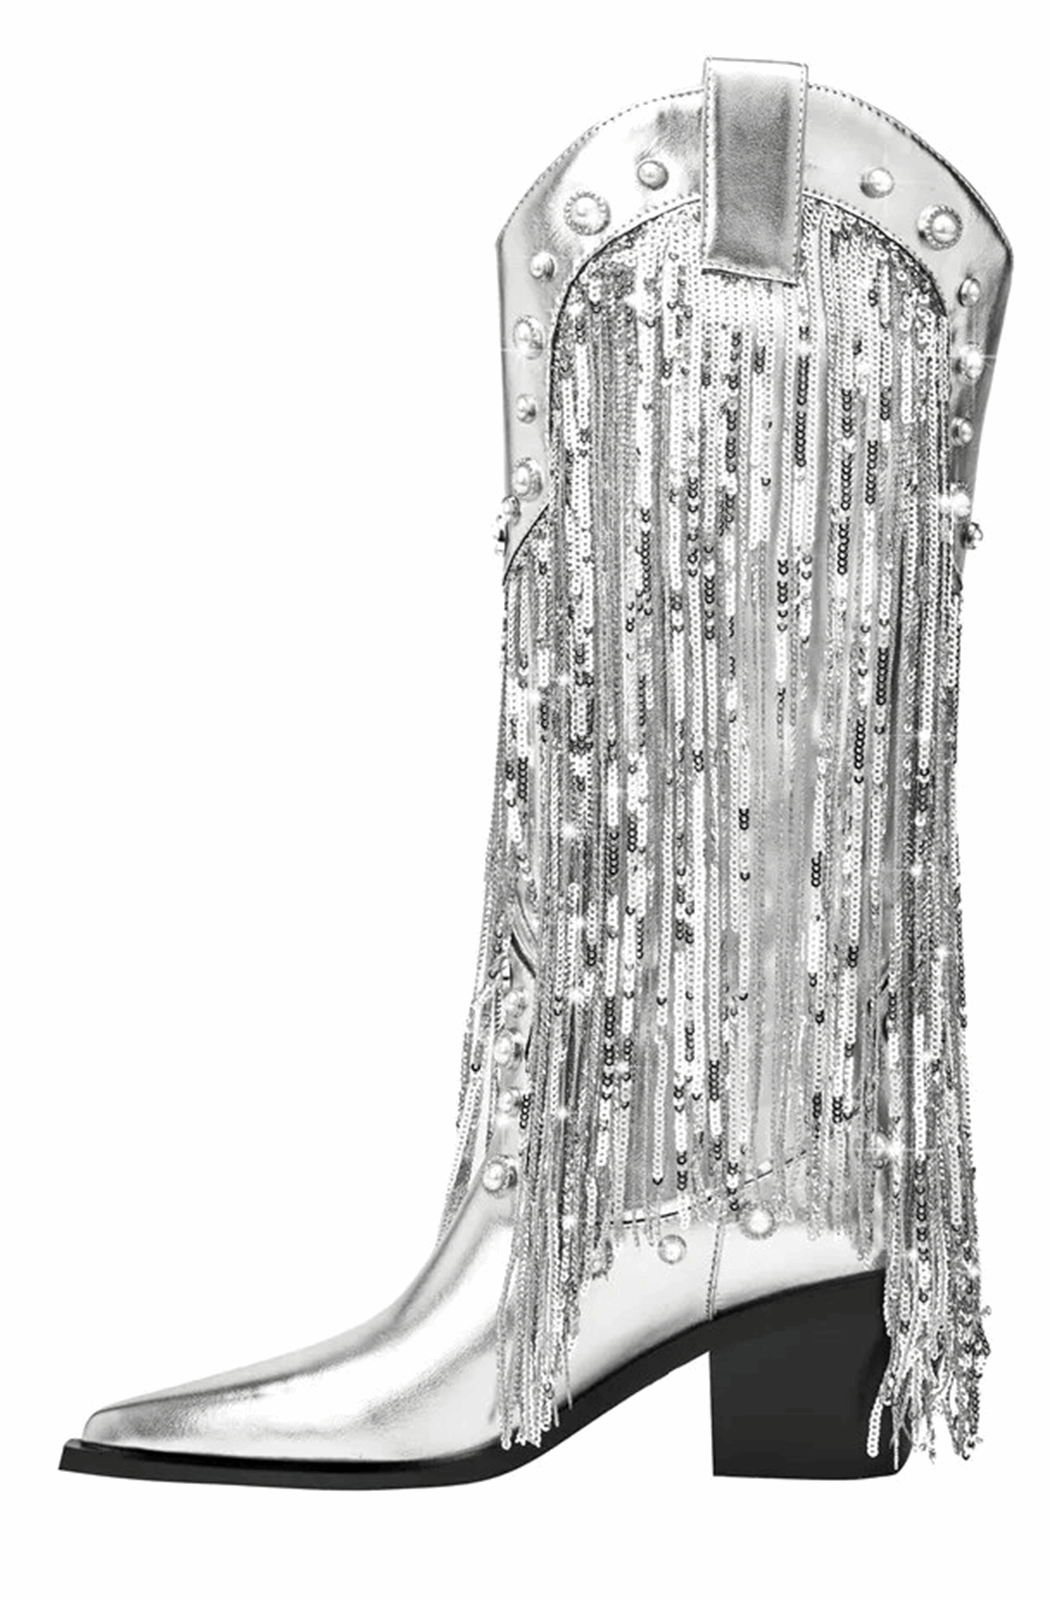 Fringed silver western boots